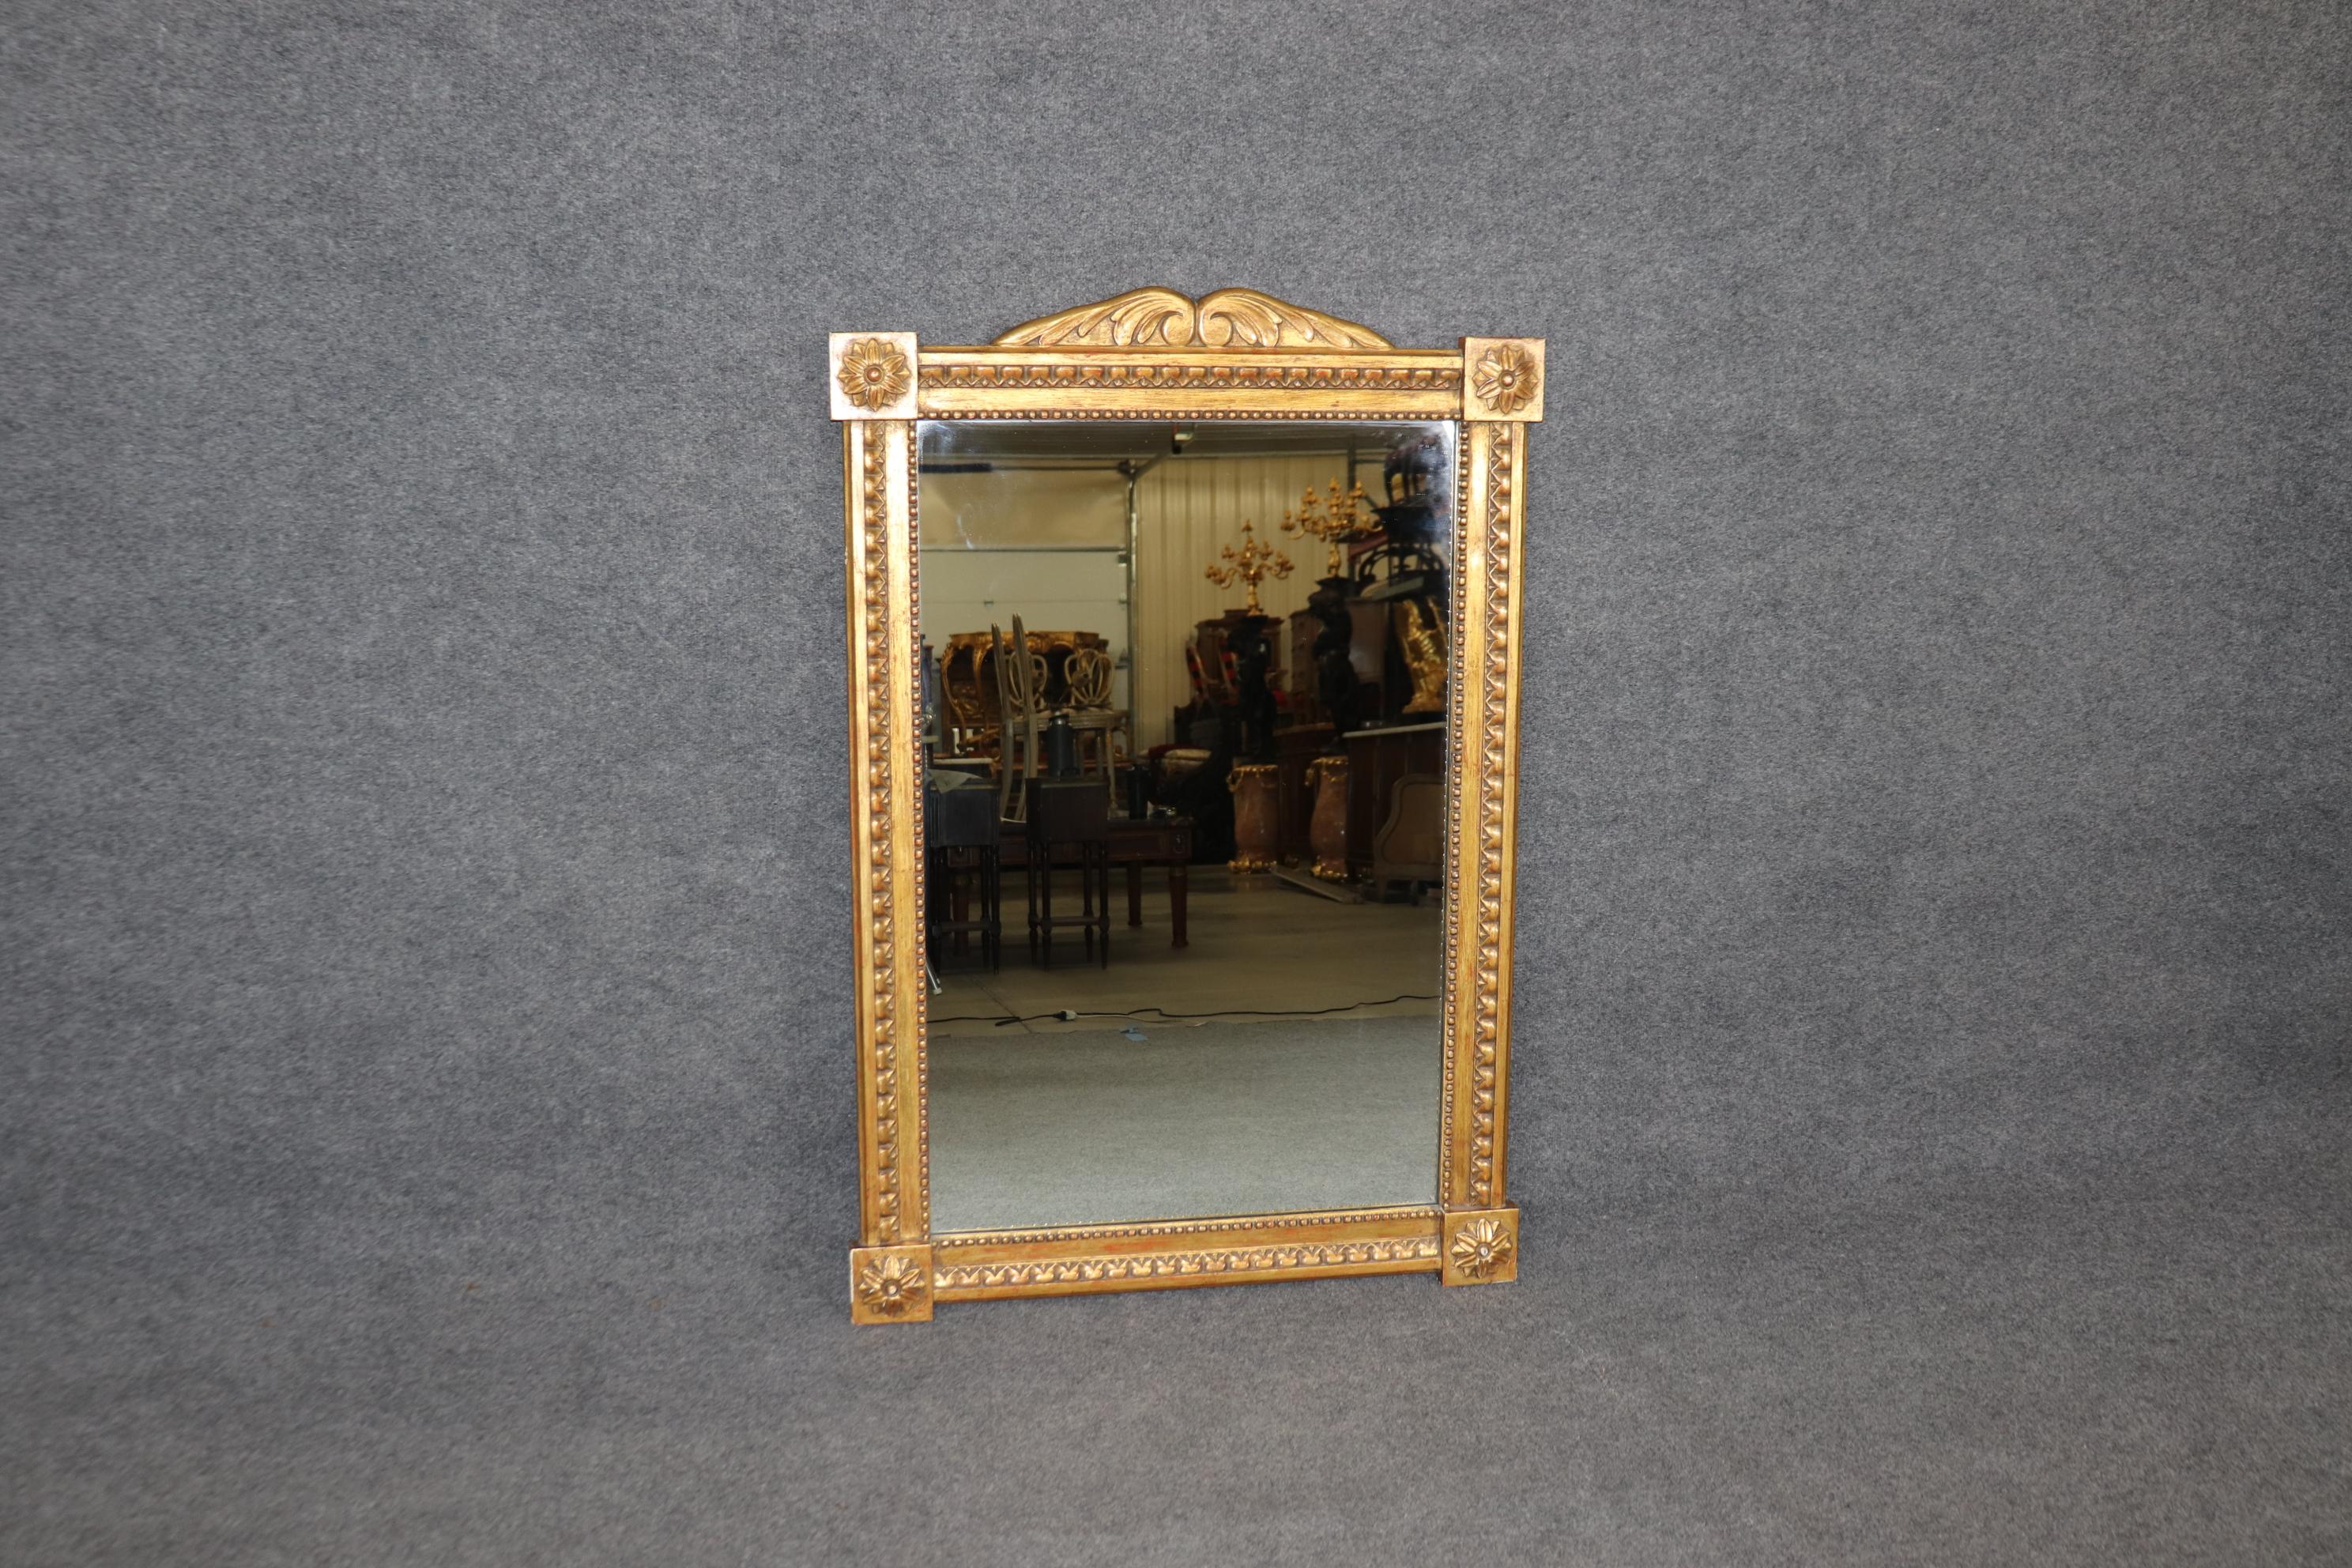 This is a rarity amongst American made furniture manufacturers and the ones espcially who treasured making exact replicas of European classics. This gorgeous mirror is in genuine gold leaf and is stamped Don Ruseau on the back. The mirror is in good